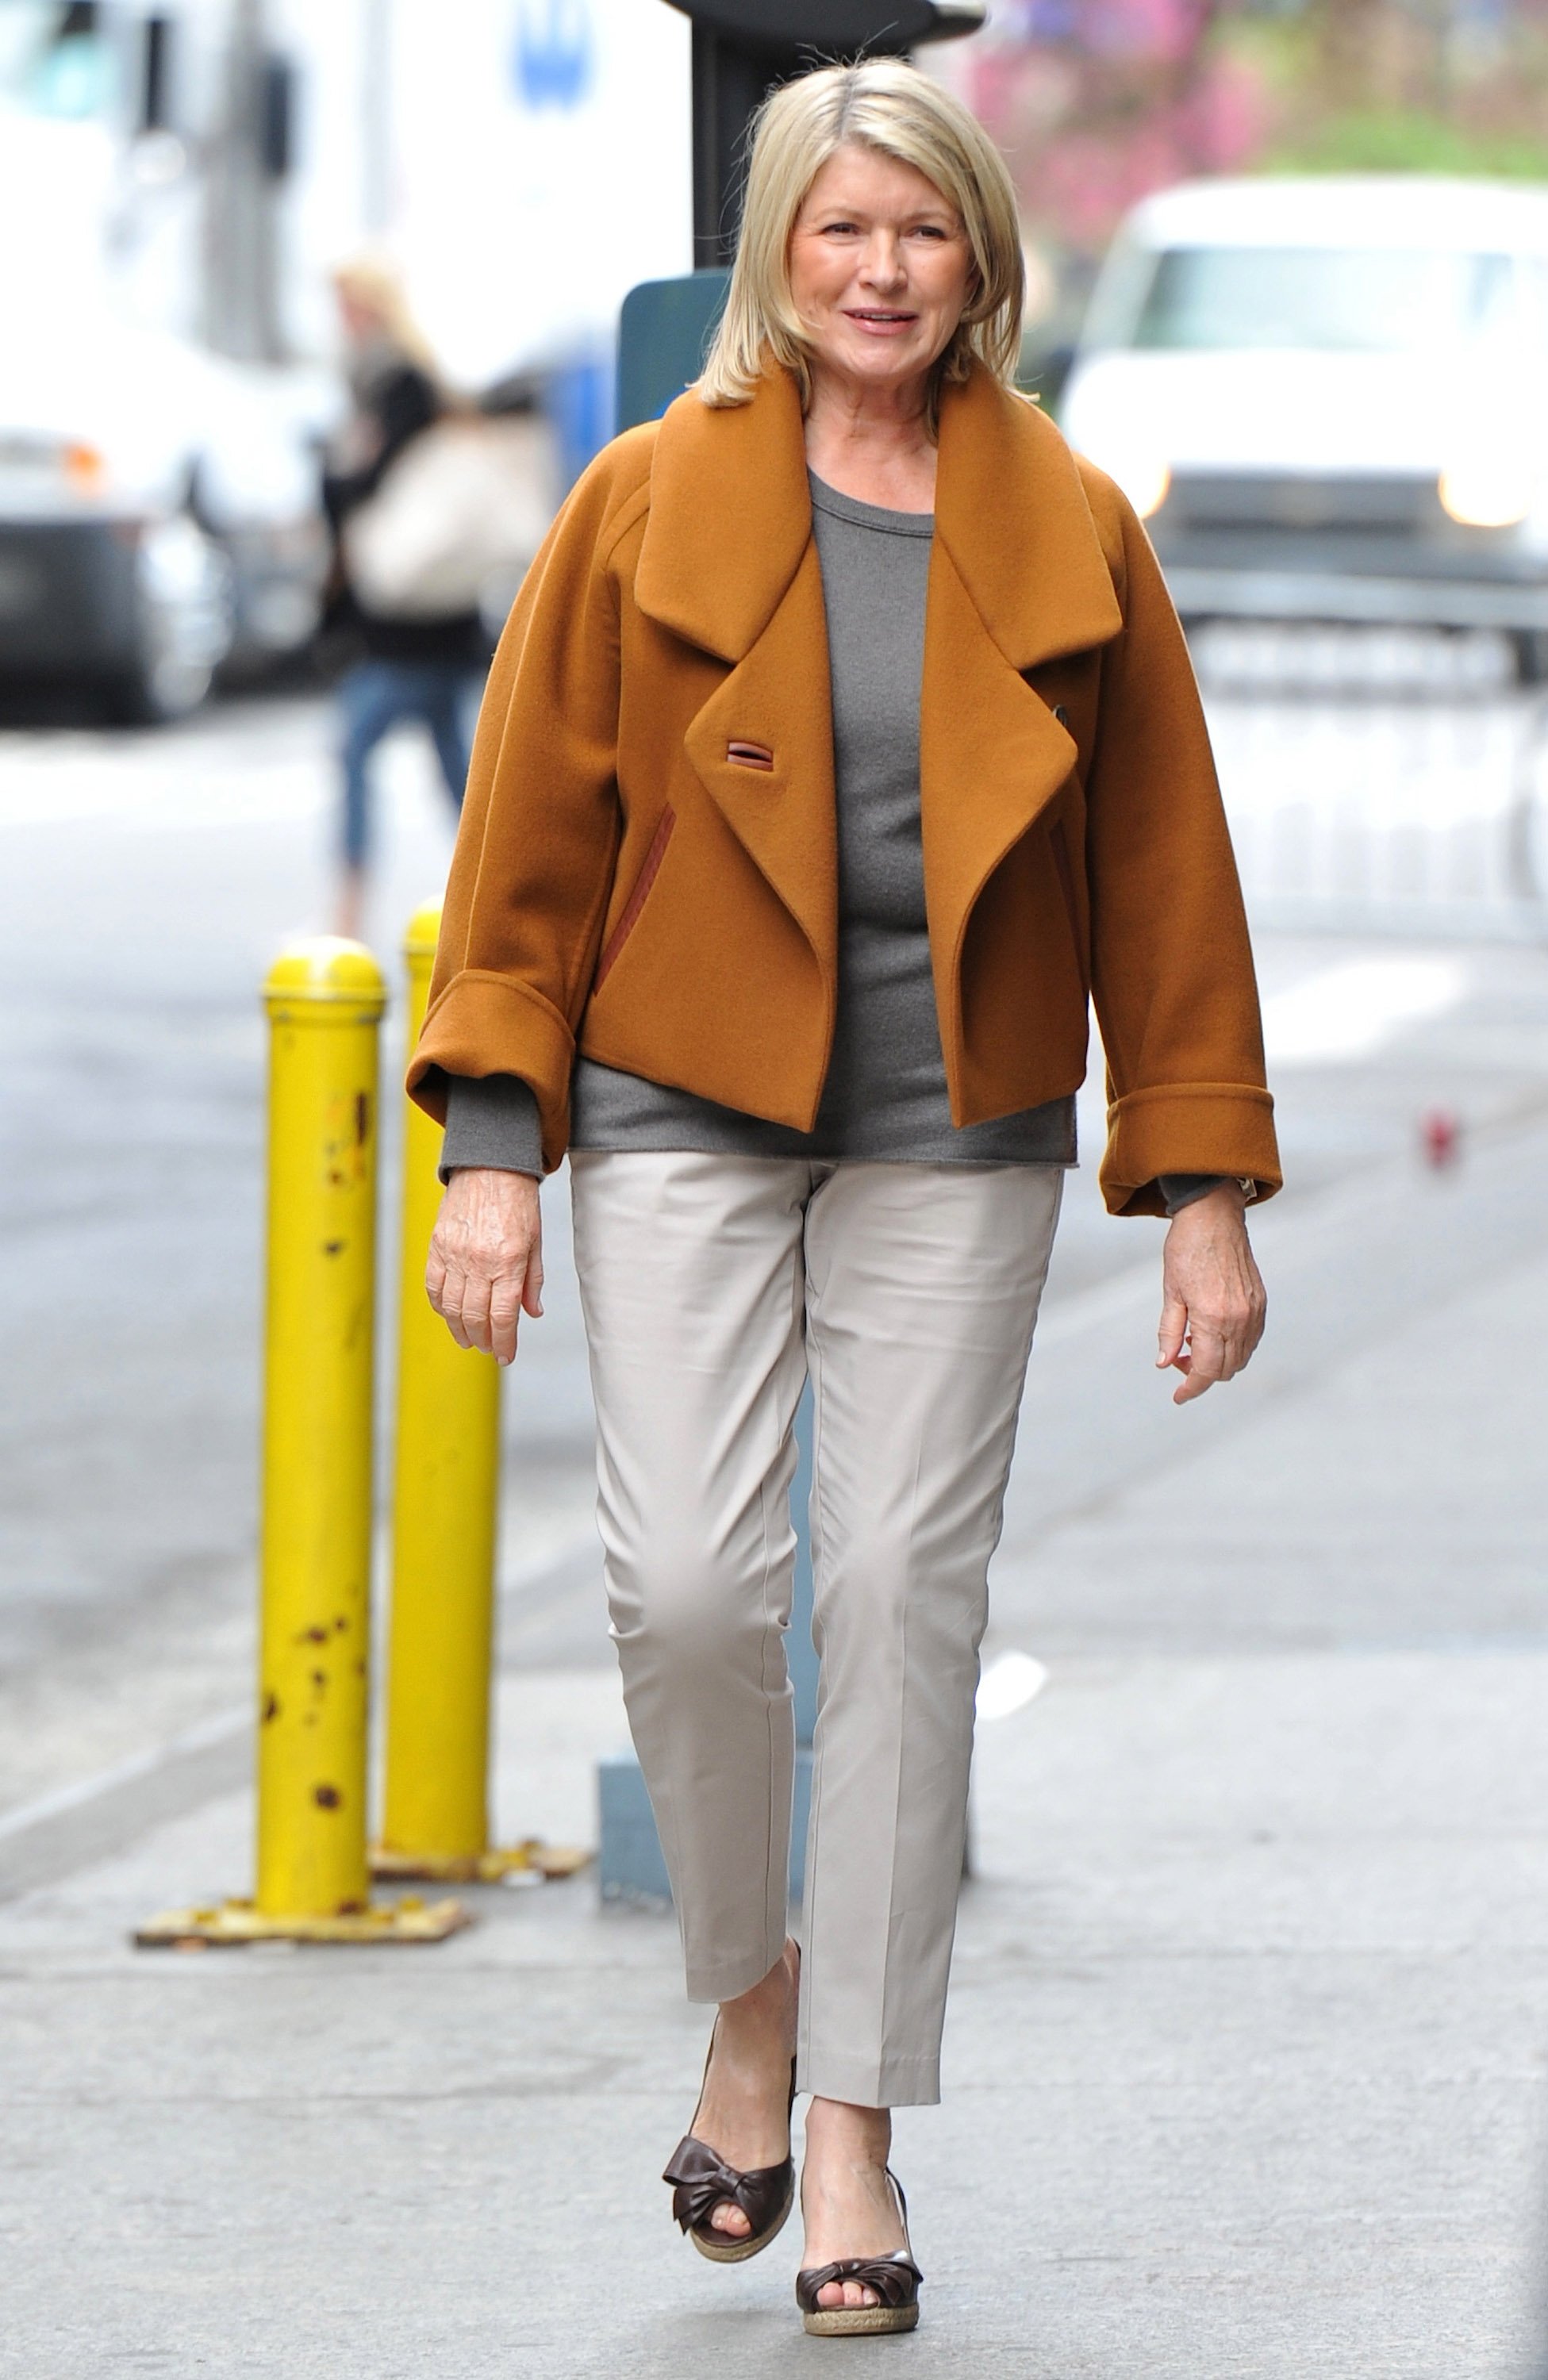 Martha Stewart was sighted in New York City on April 10, 2012. | Source: Getty Images